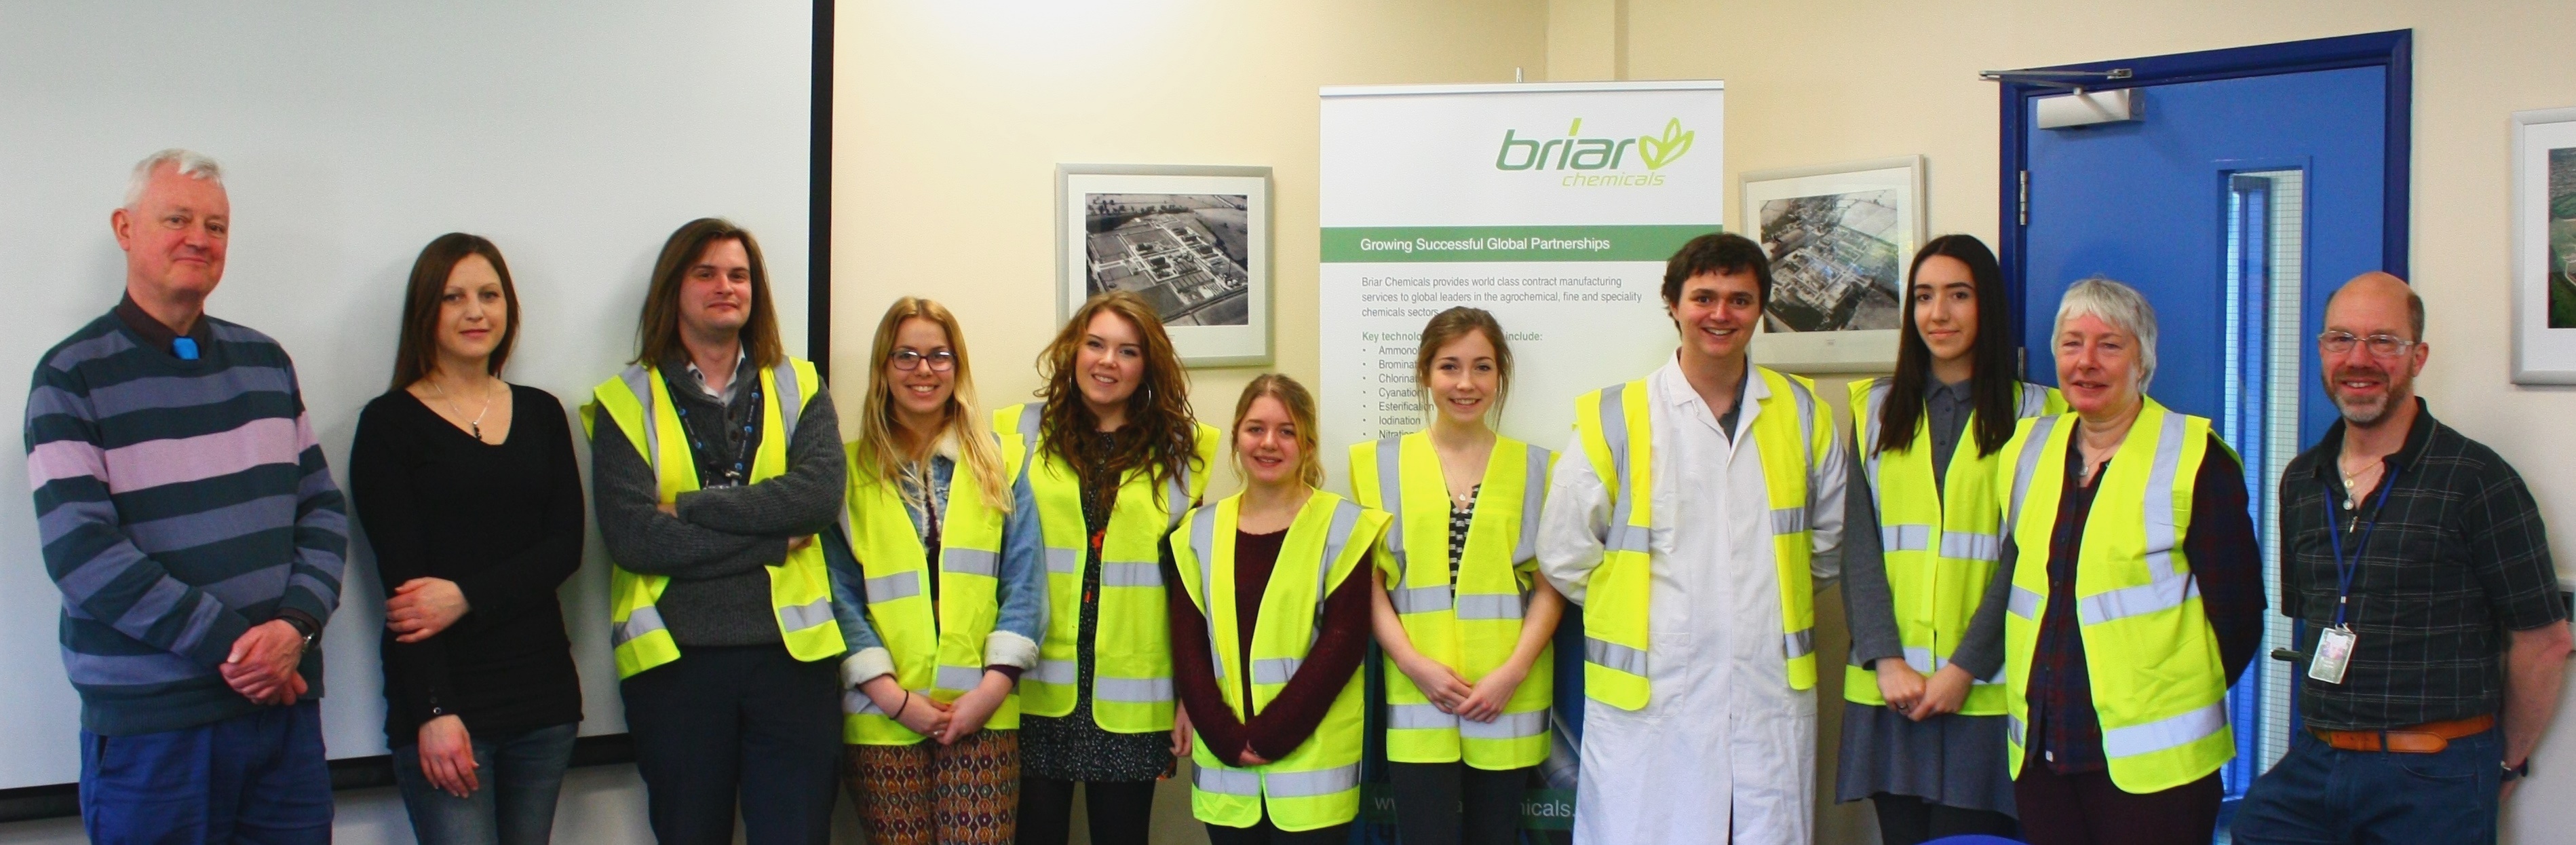 ChemNet students visit Briar Chemicals to learn about chemistry